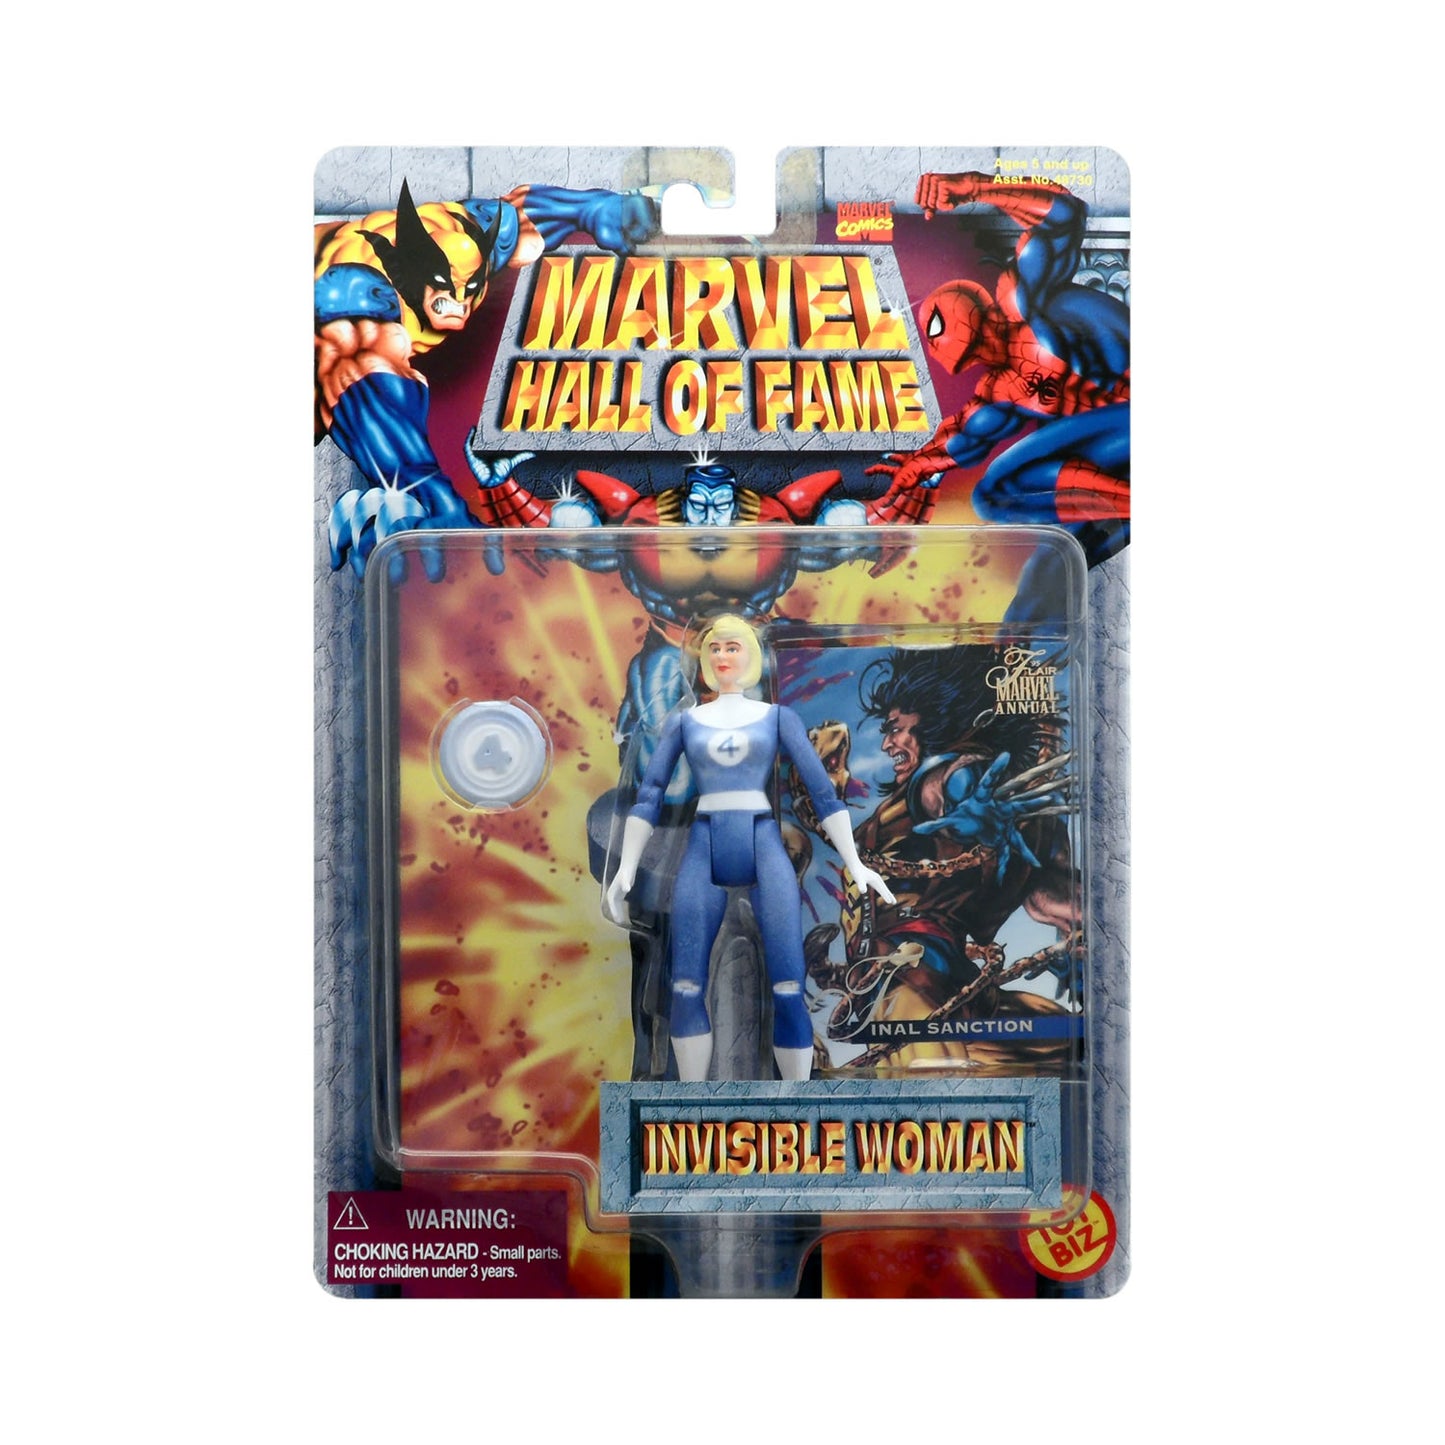 Marvel Hall of Fame Invisible Woman with Color Change Action